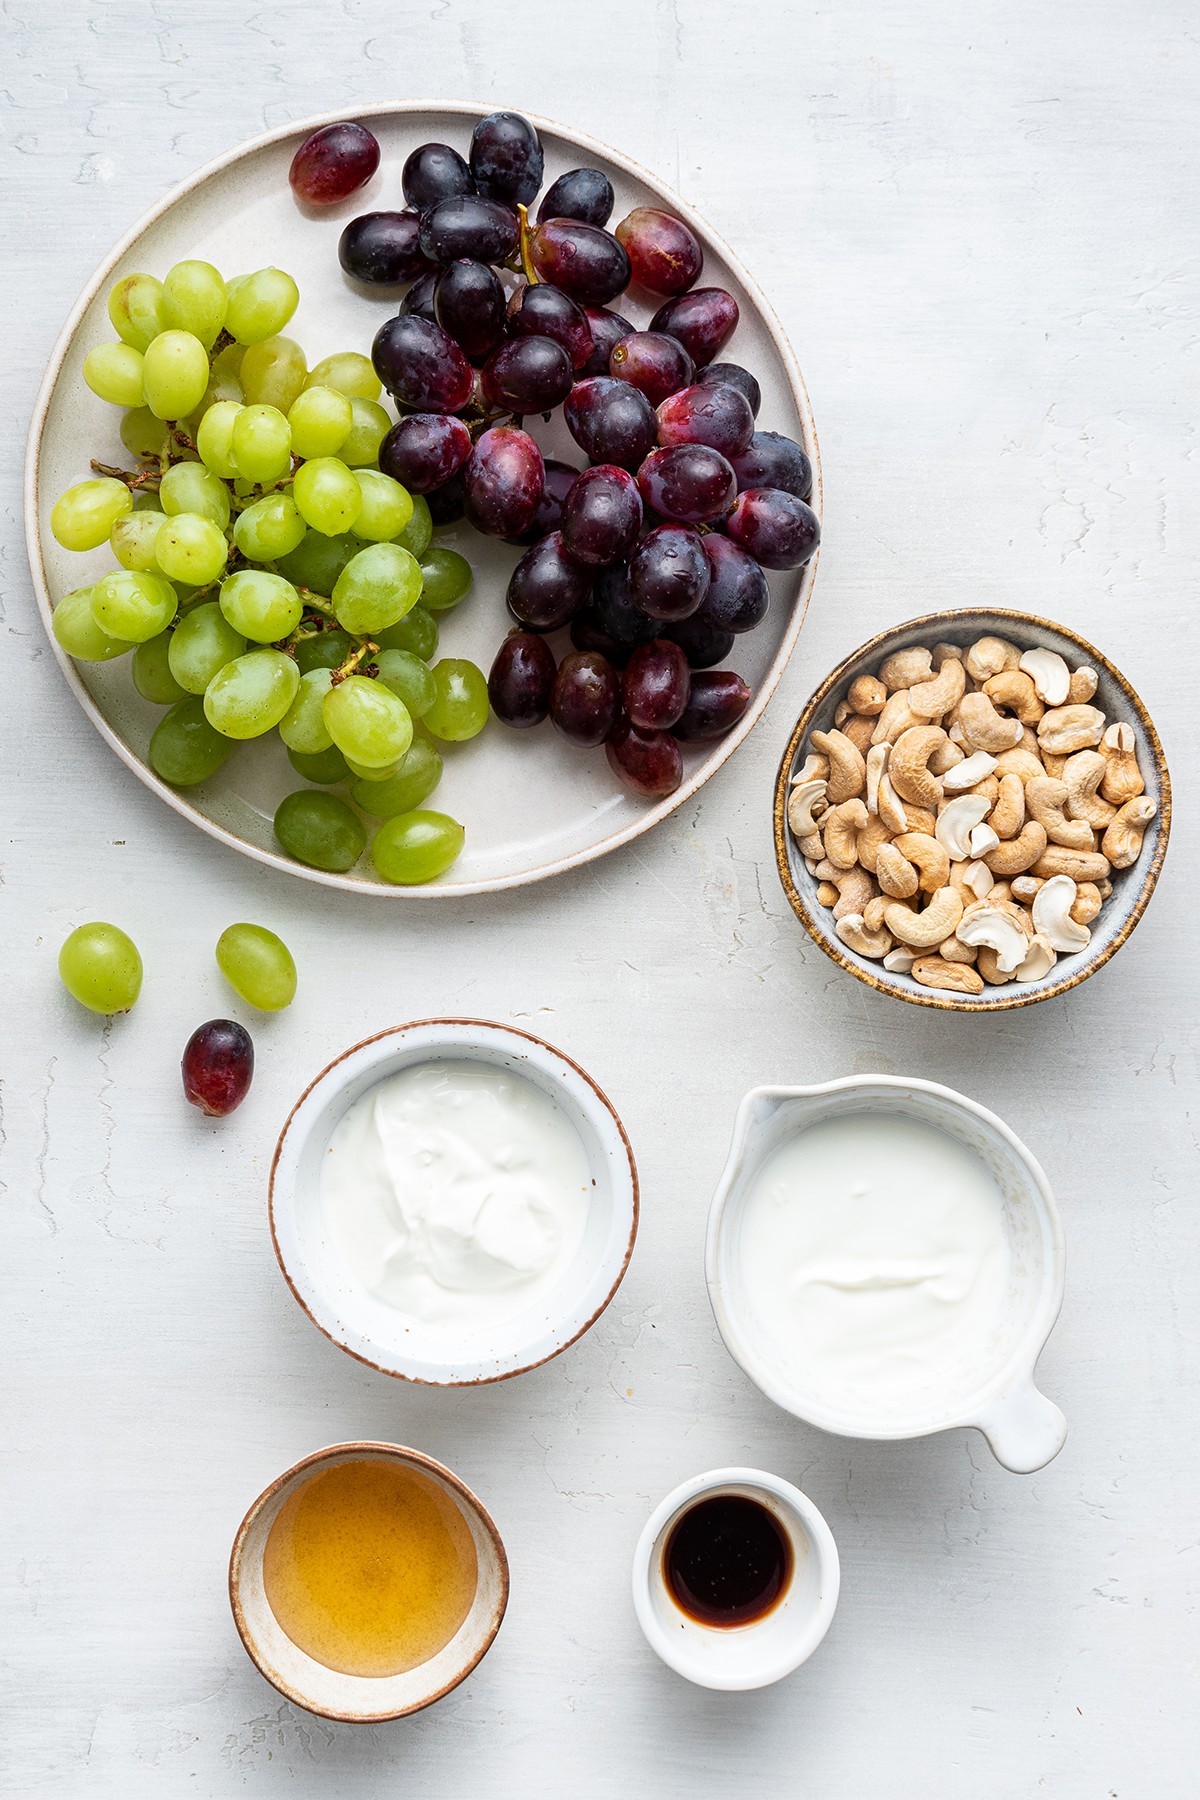 Overhead view of the ingredients needed for grape salad: a plate of red a green grapes, a bowl of cashews, a bowl of Greek yogurt, a bowl of sour cream, a bowl of honey, and a bowl of vanilla extract